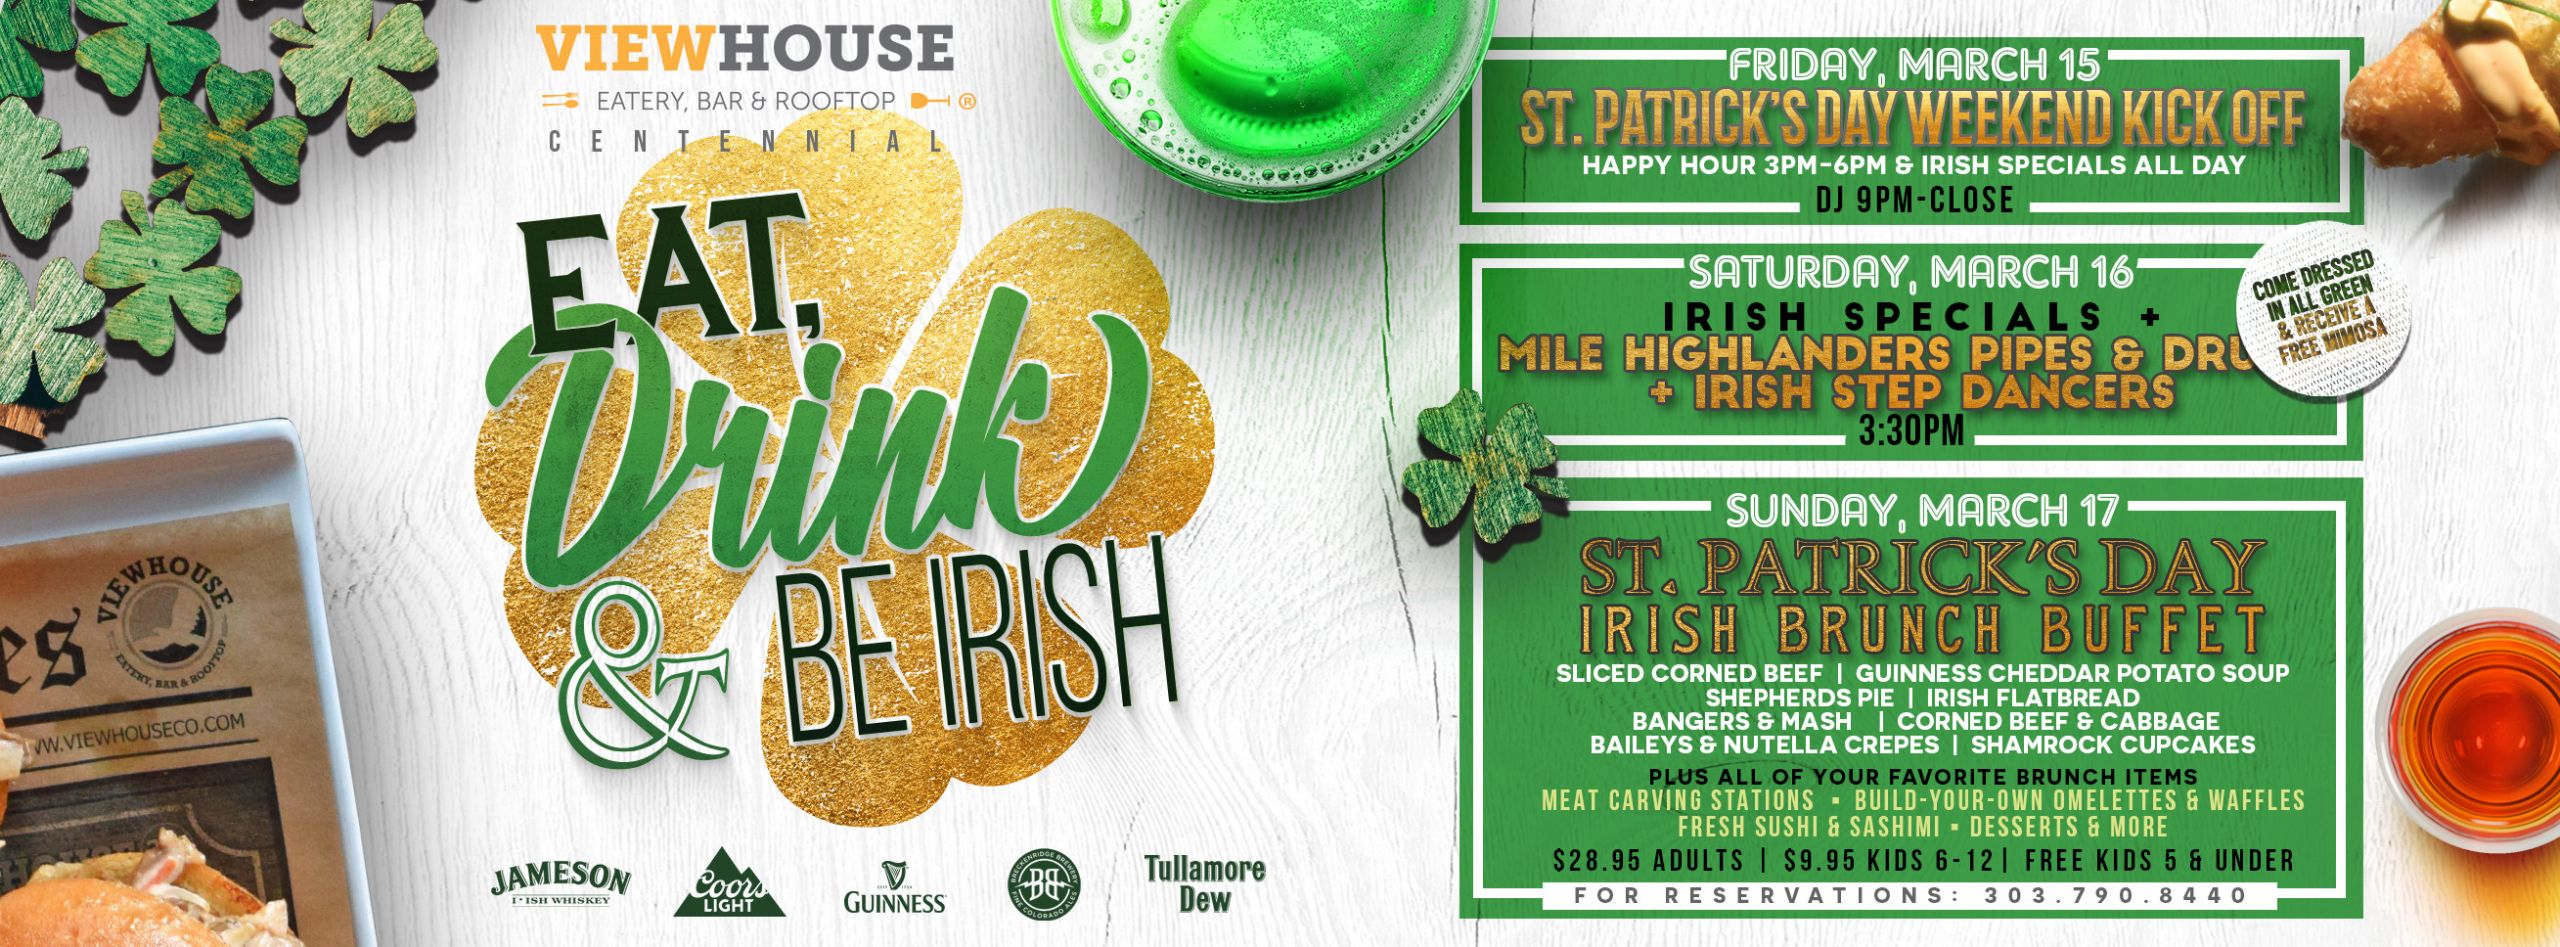 St Patrick's Day Food Specials
 St Patrick s Day Irish Brunch Buffet & Specials ViewHouse